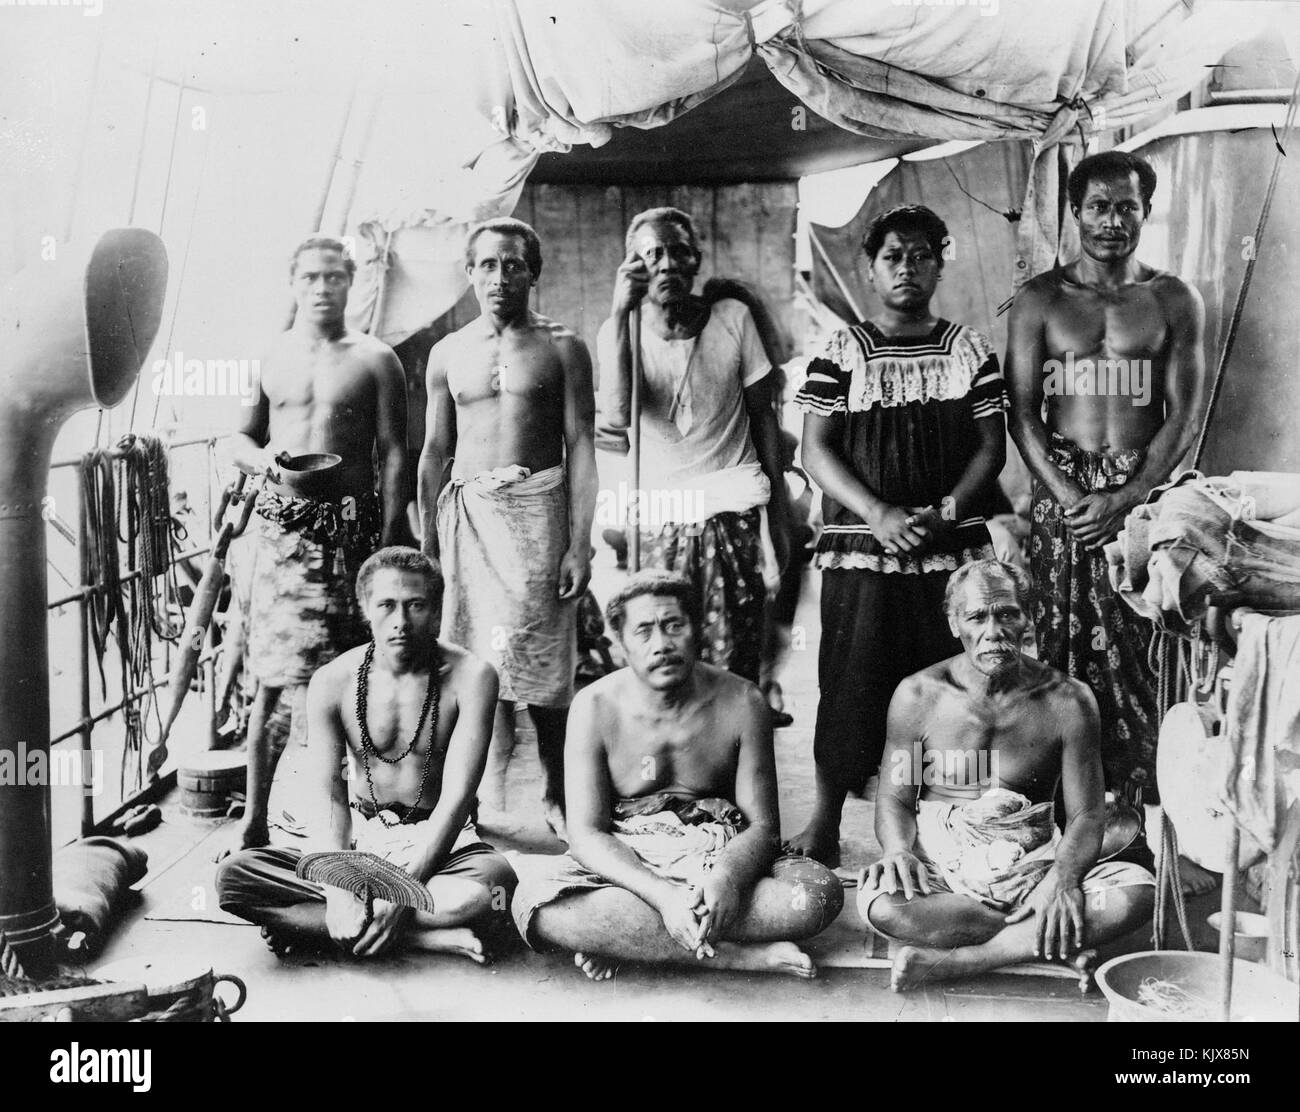 Lauaki Namulau'ulu Mamoe (standing 3rd from left with orator's staff) and other chiefs aboard German warship taking them to exile in Saipan, 2909 Stock Photo